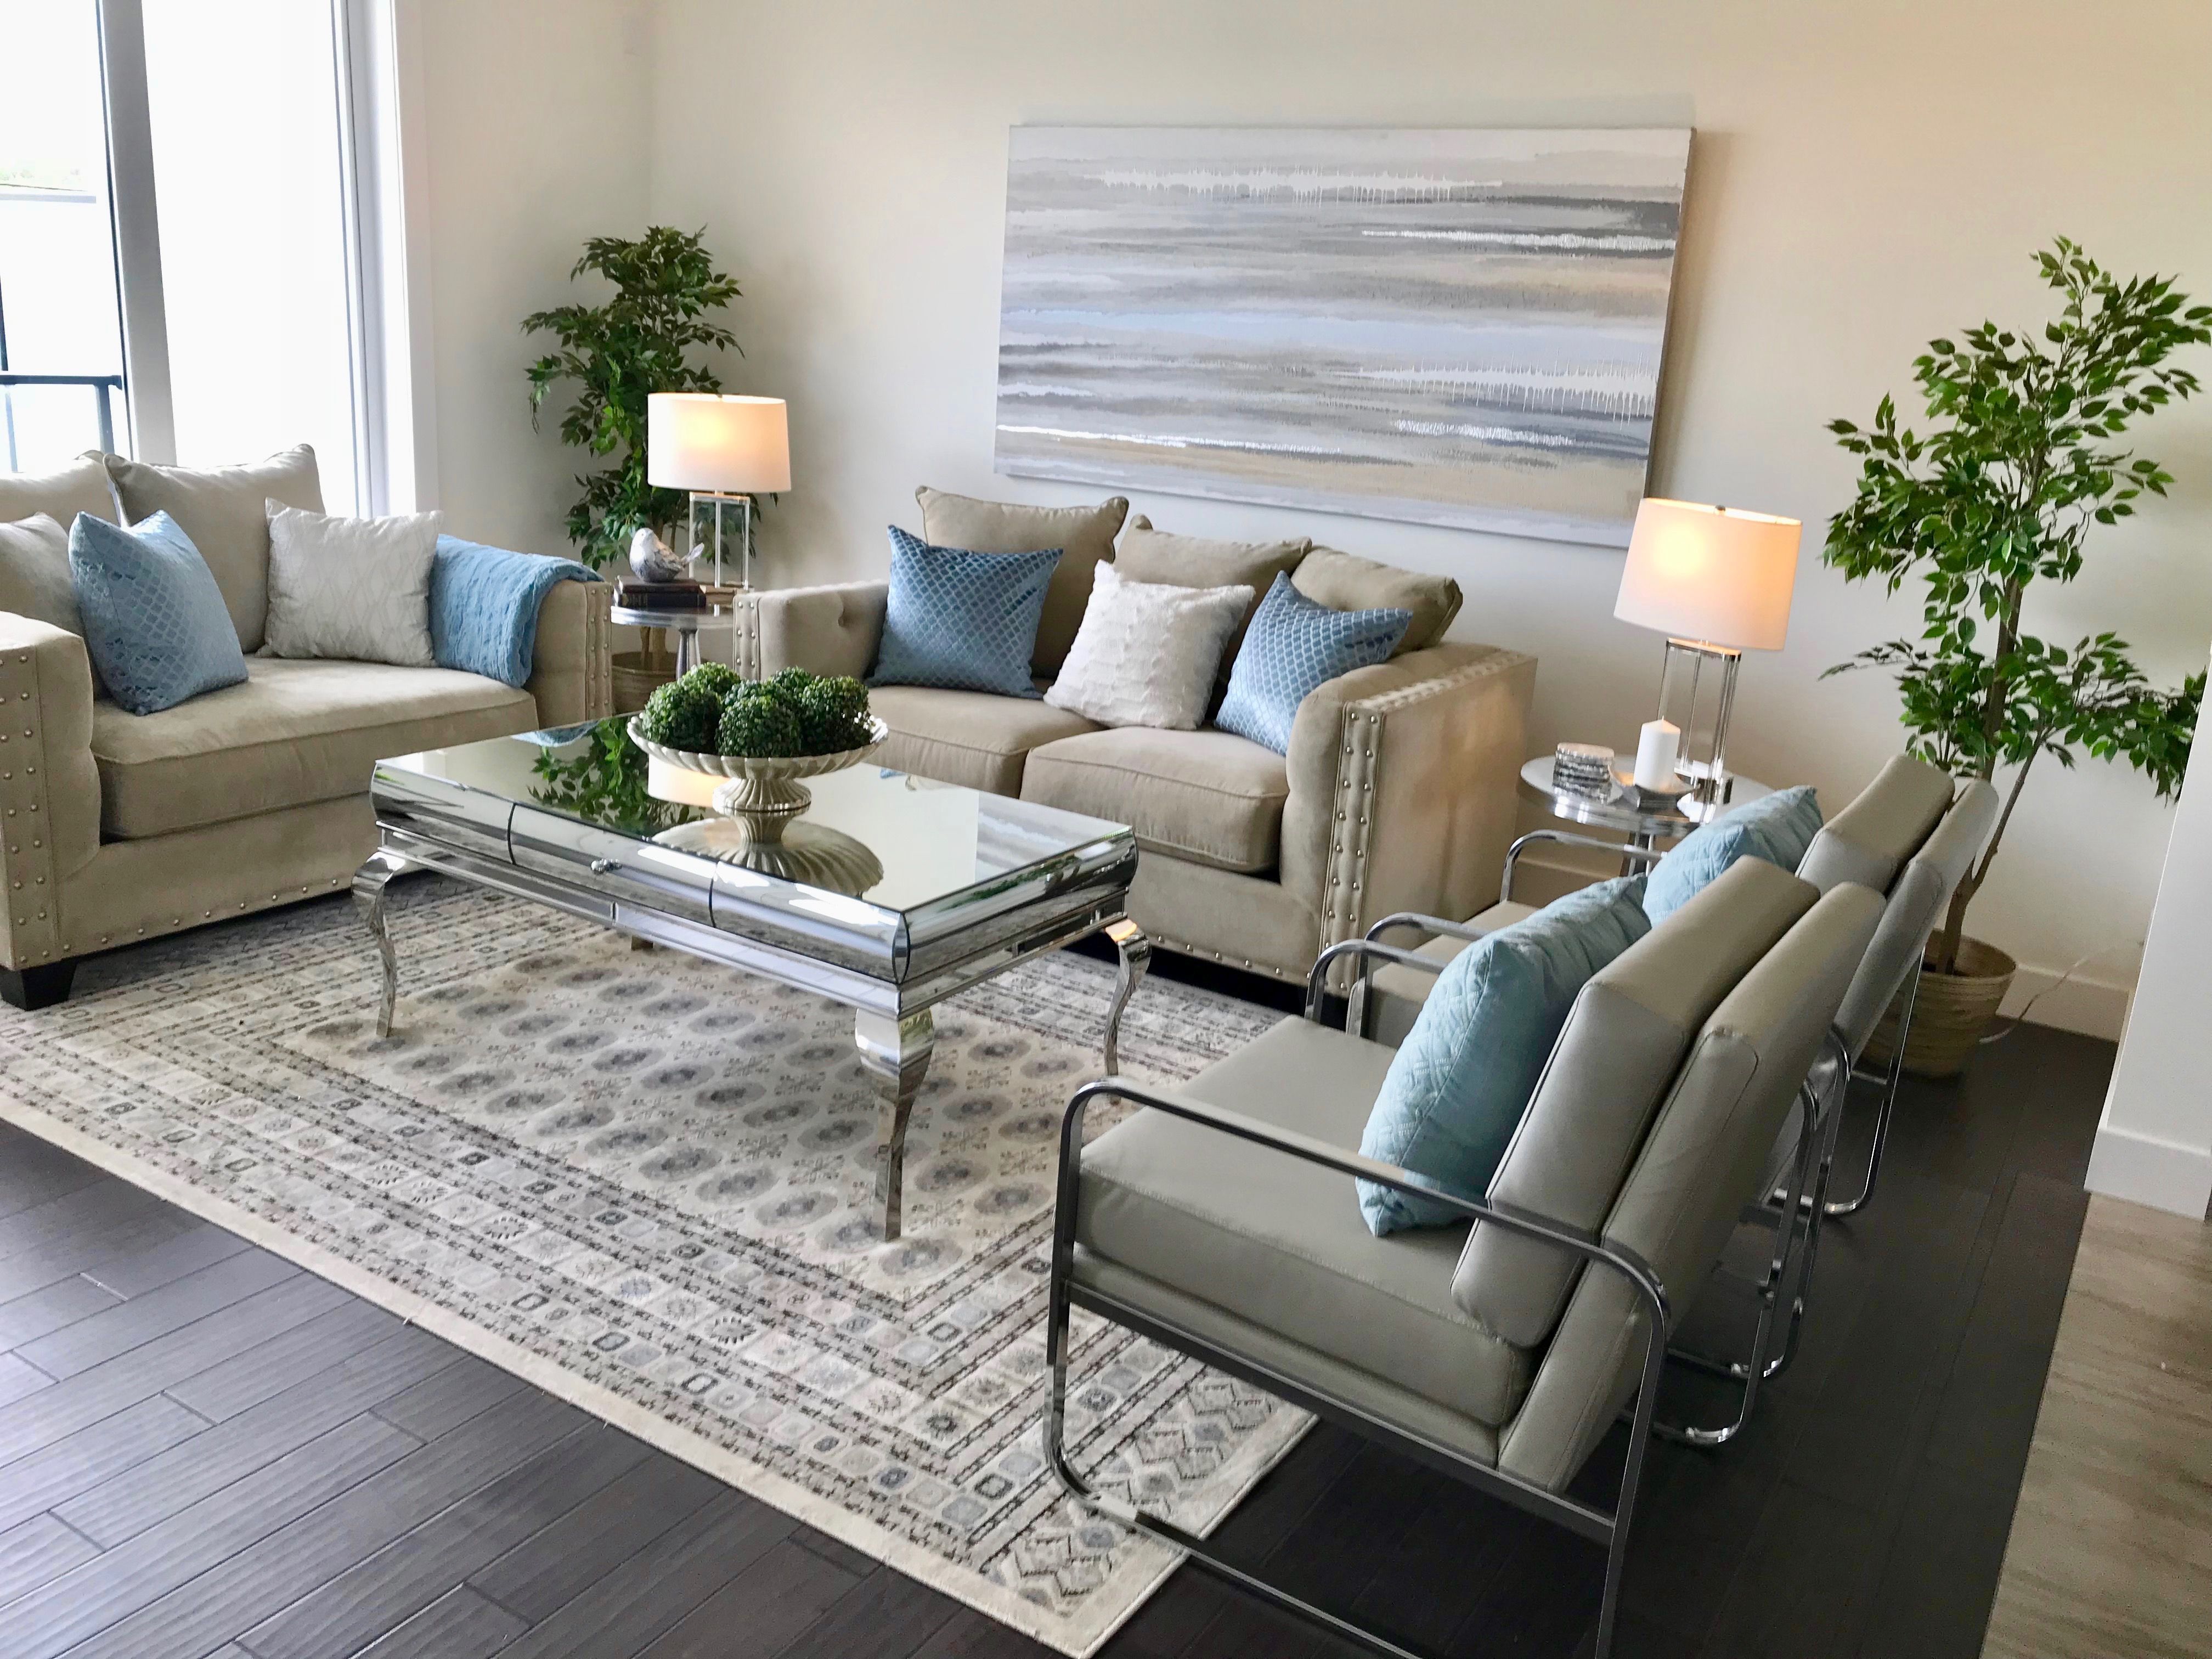 5 Small Living Room Staging Ideas To Help You Sell Your Home Fast